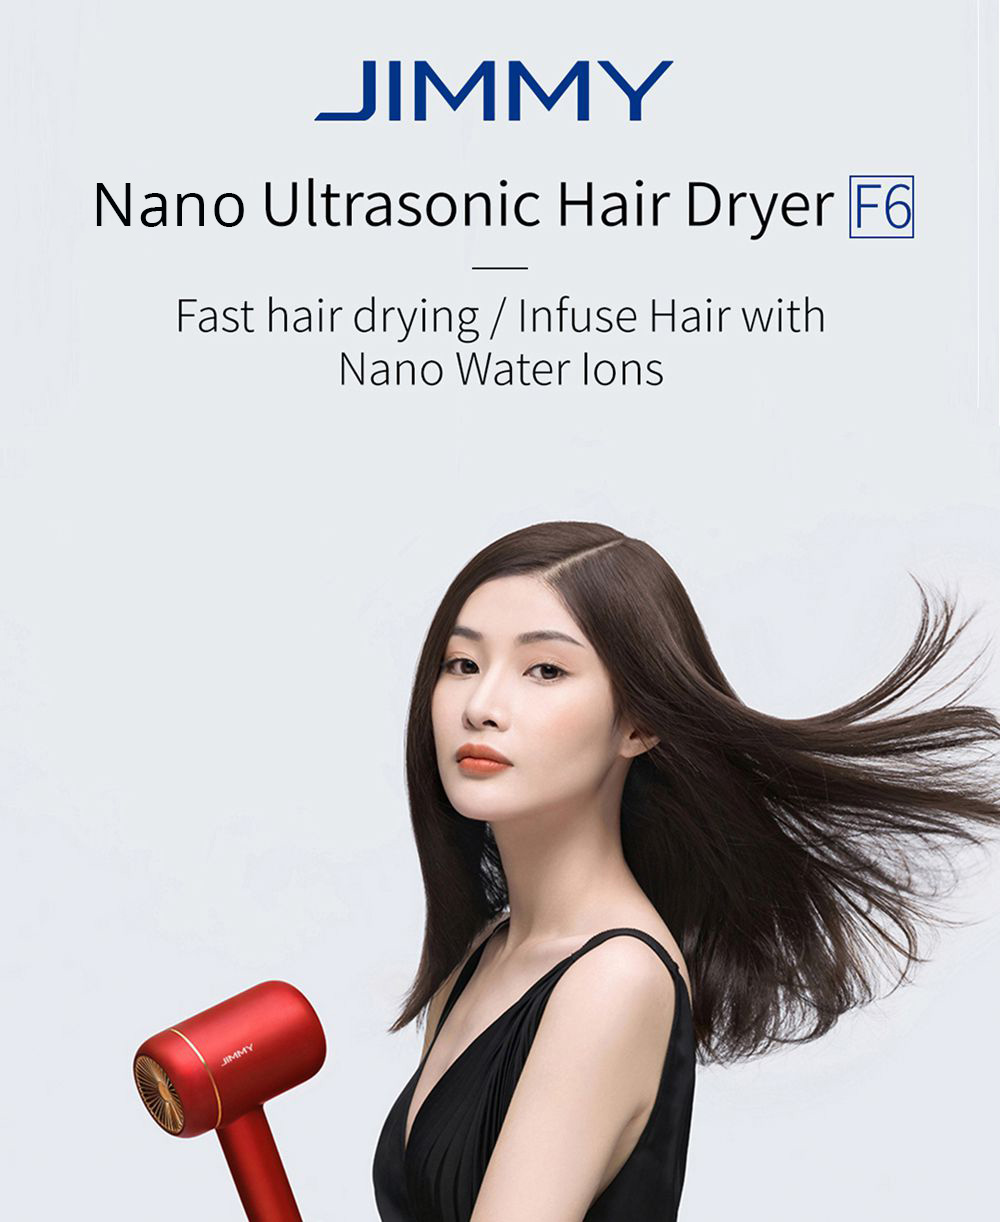 Xiaomi JIMMY F6 Hair Dryer 220V 1800W Electric Portable Negative ion Noise Reducing EU Plug - Ruby Red